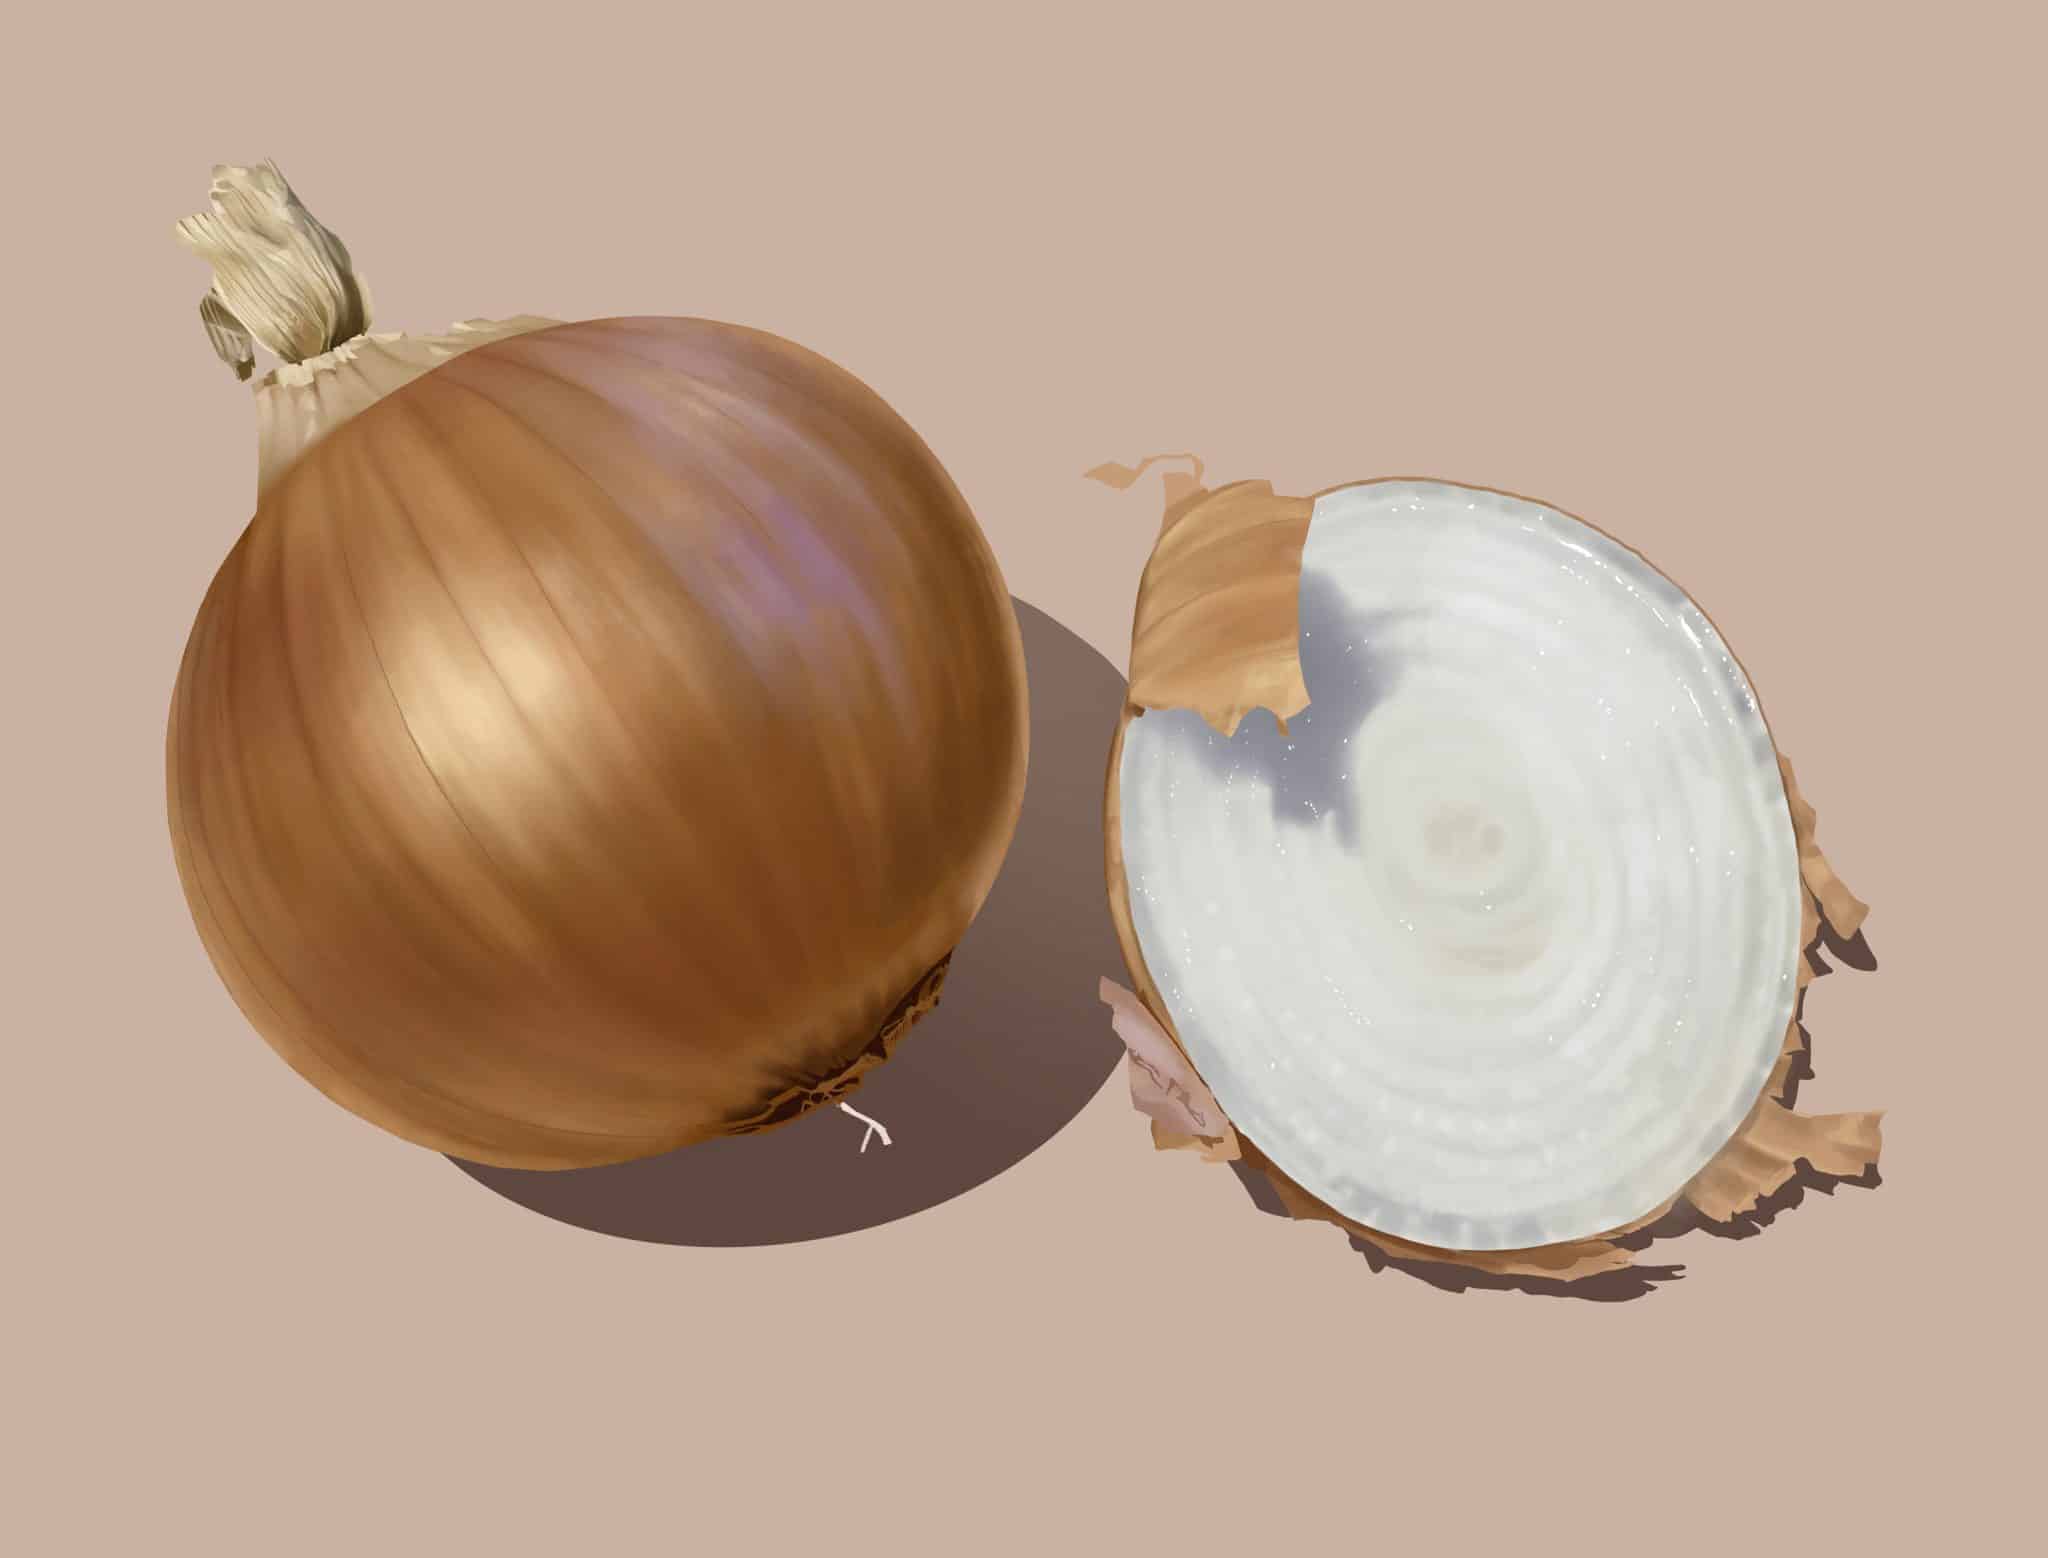 Onion vegetable drawing free image download